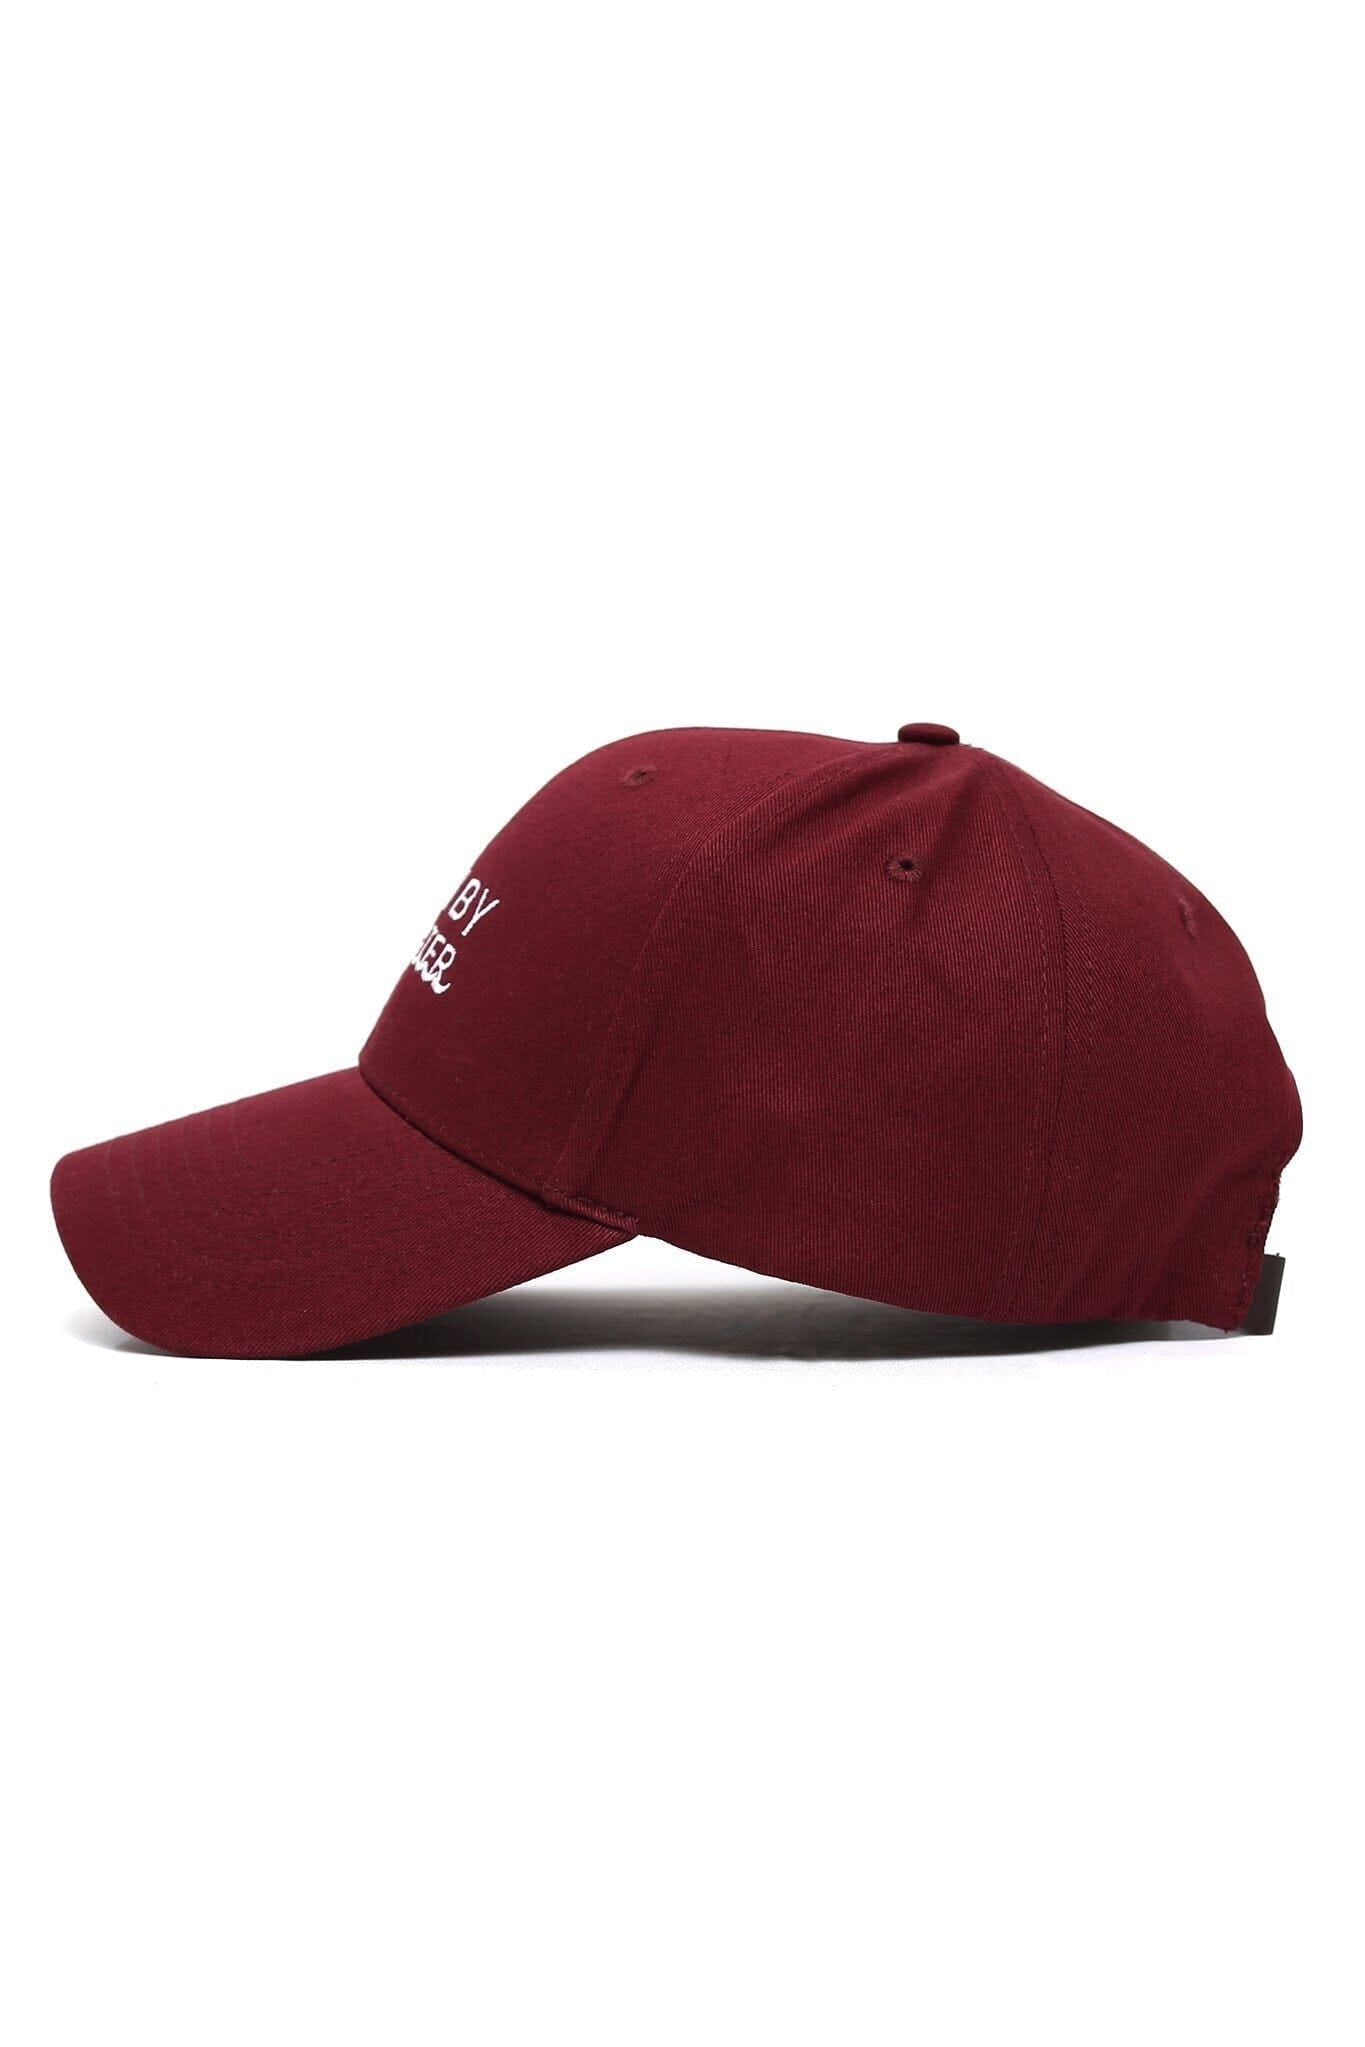 BORN BY WATER WAVES CAP - R-BURGUNDY - OS